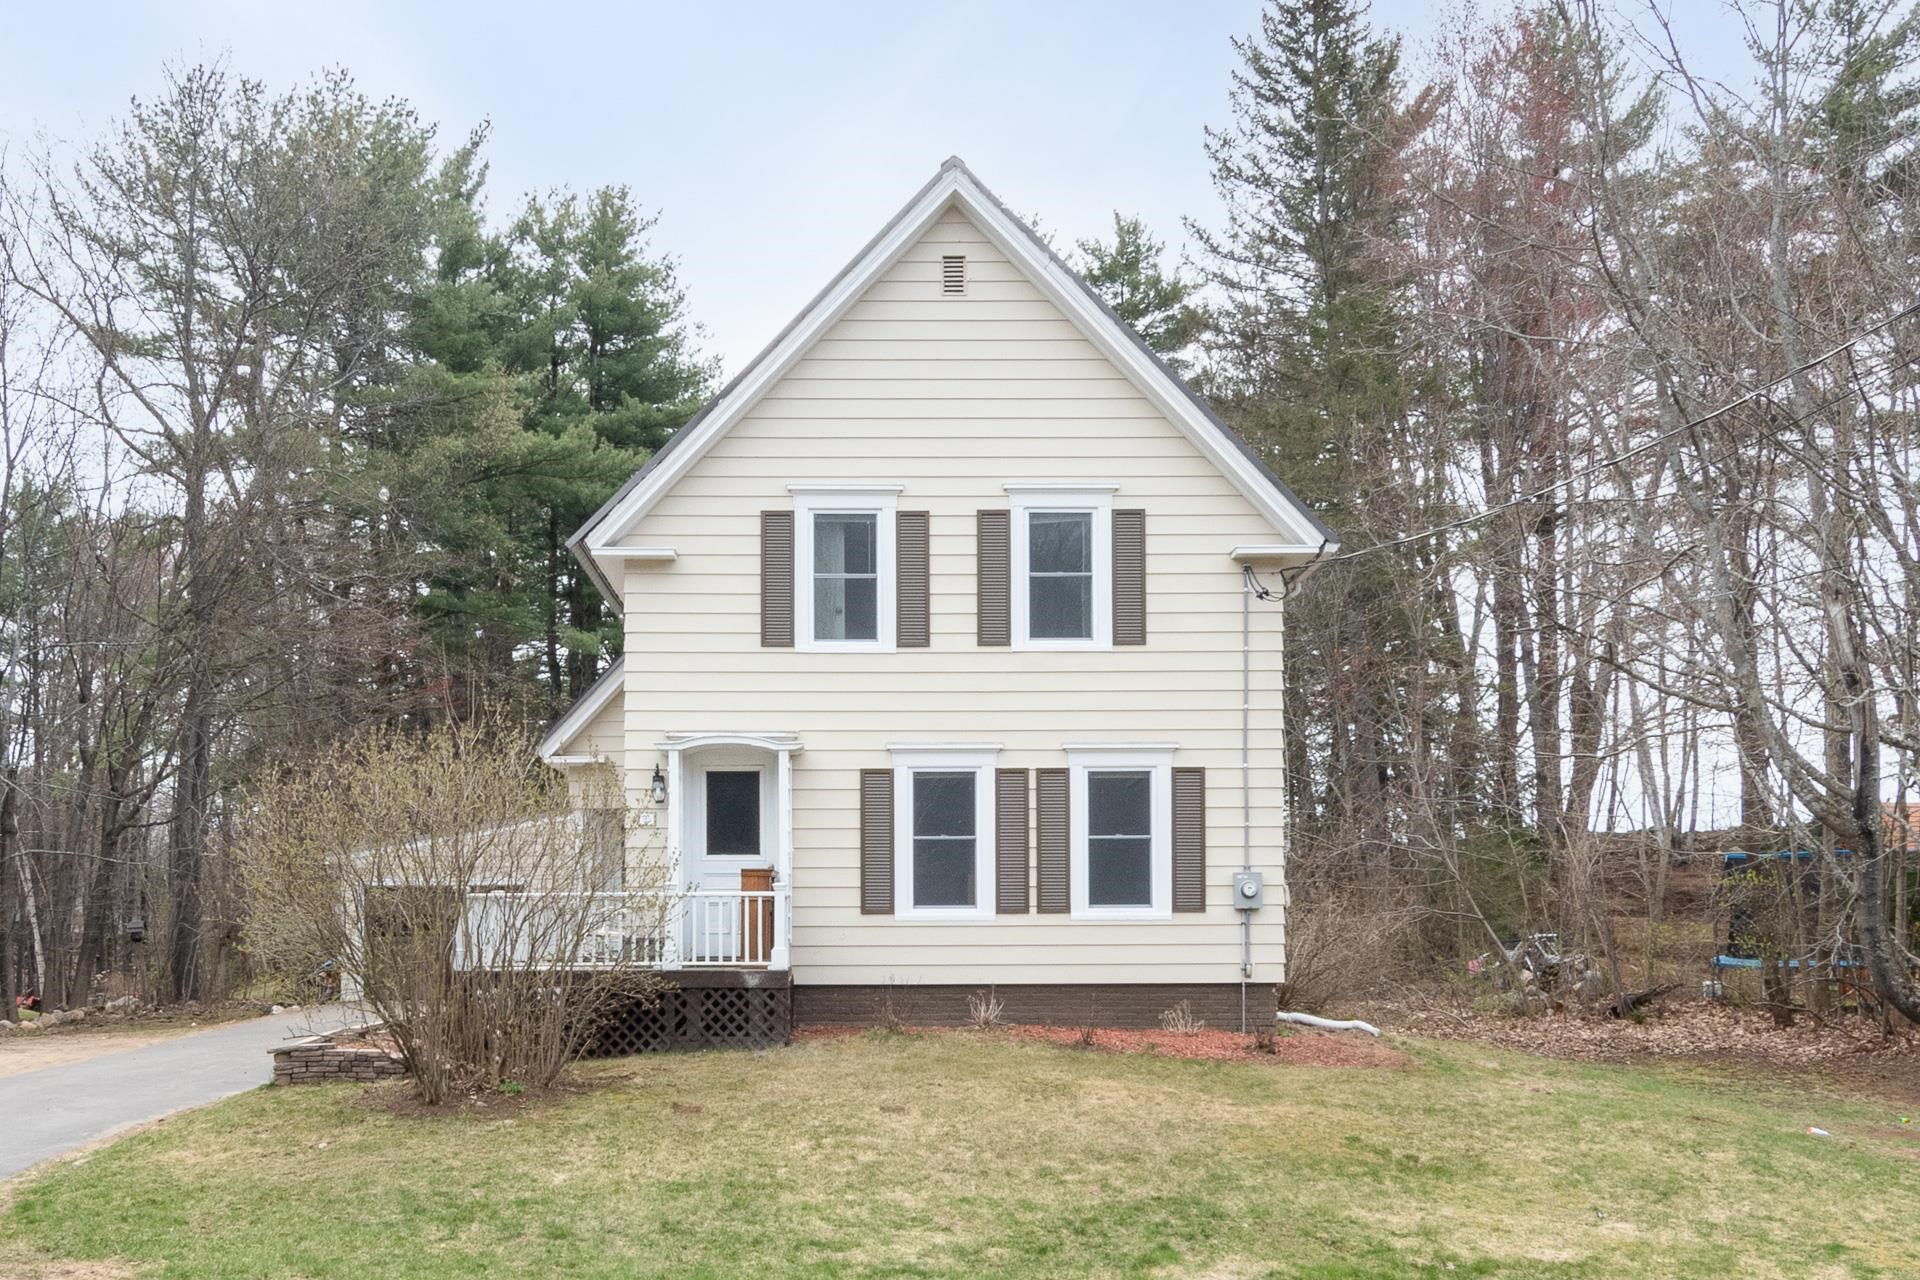 GILFORD NH Homes for sale